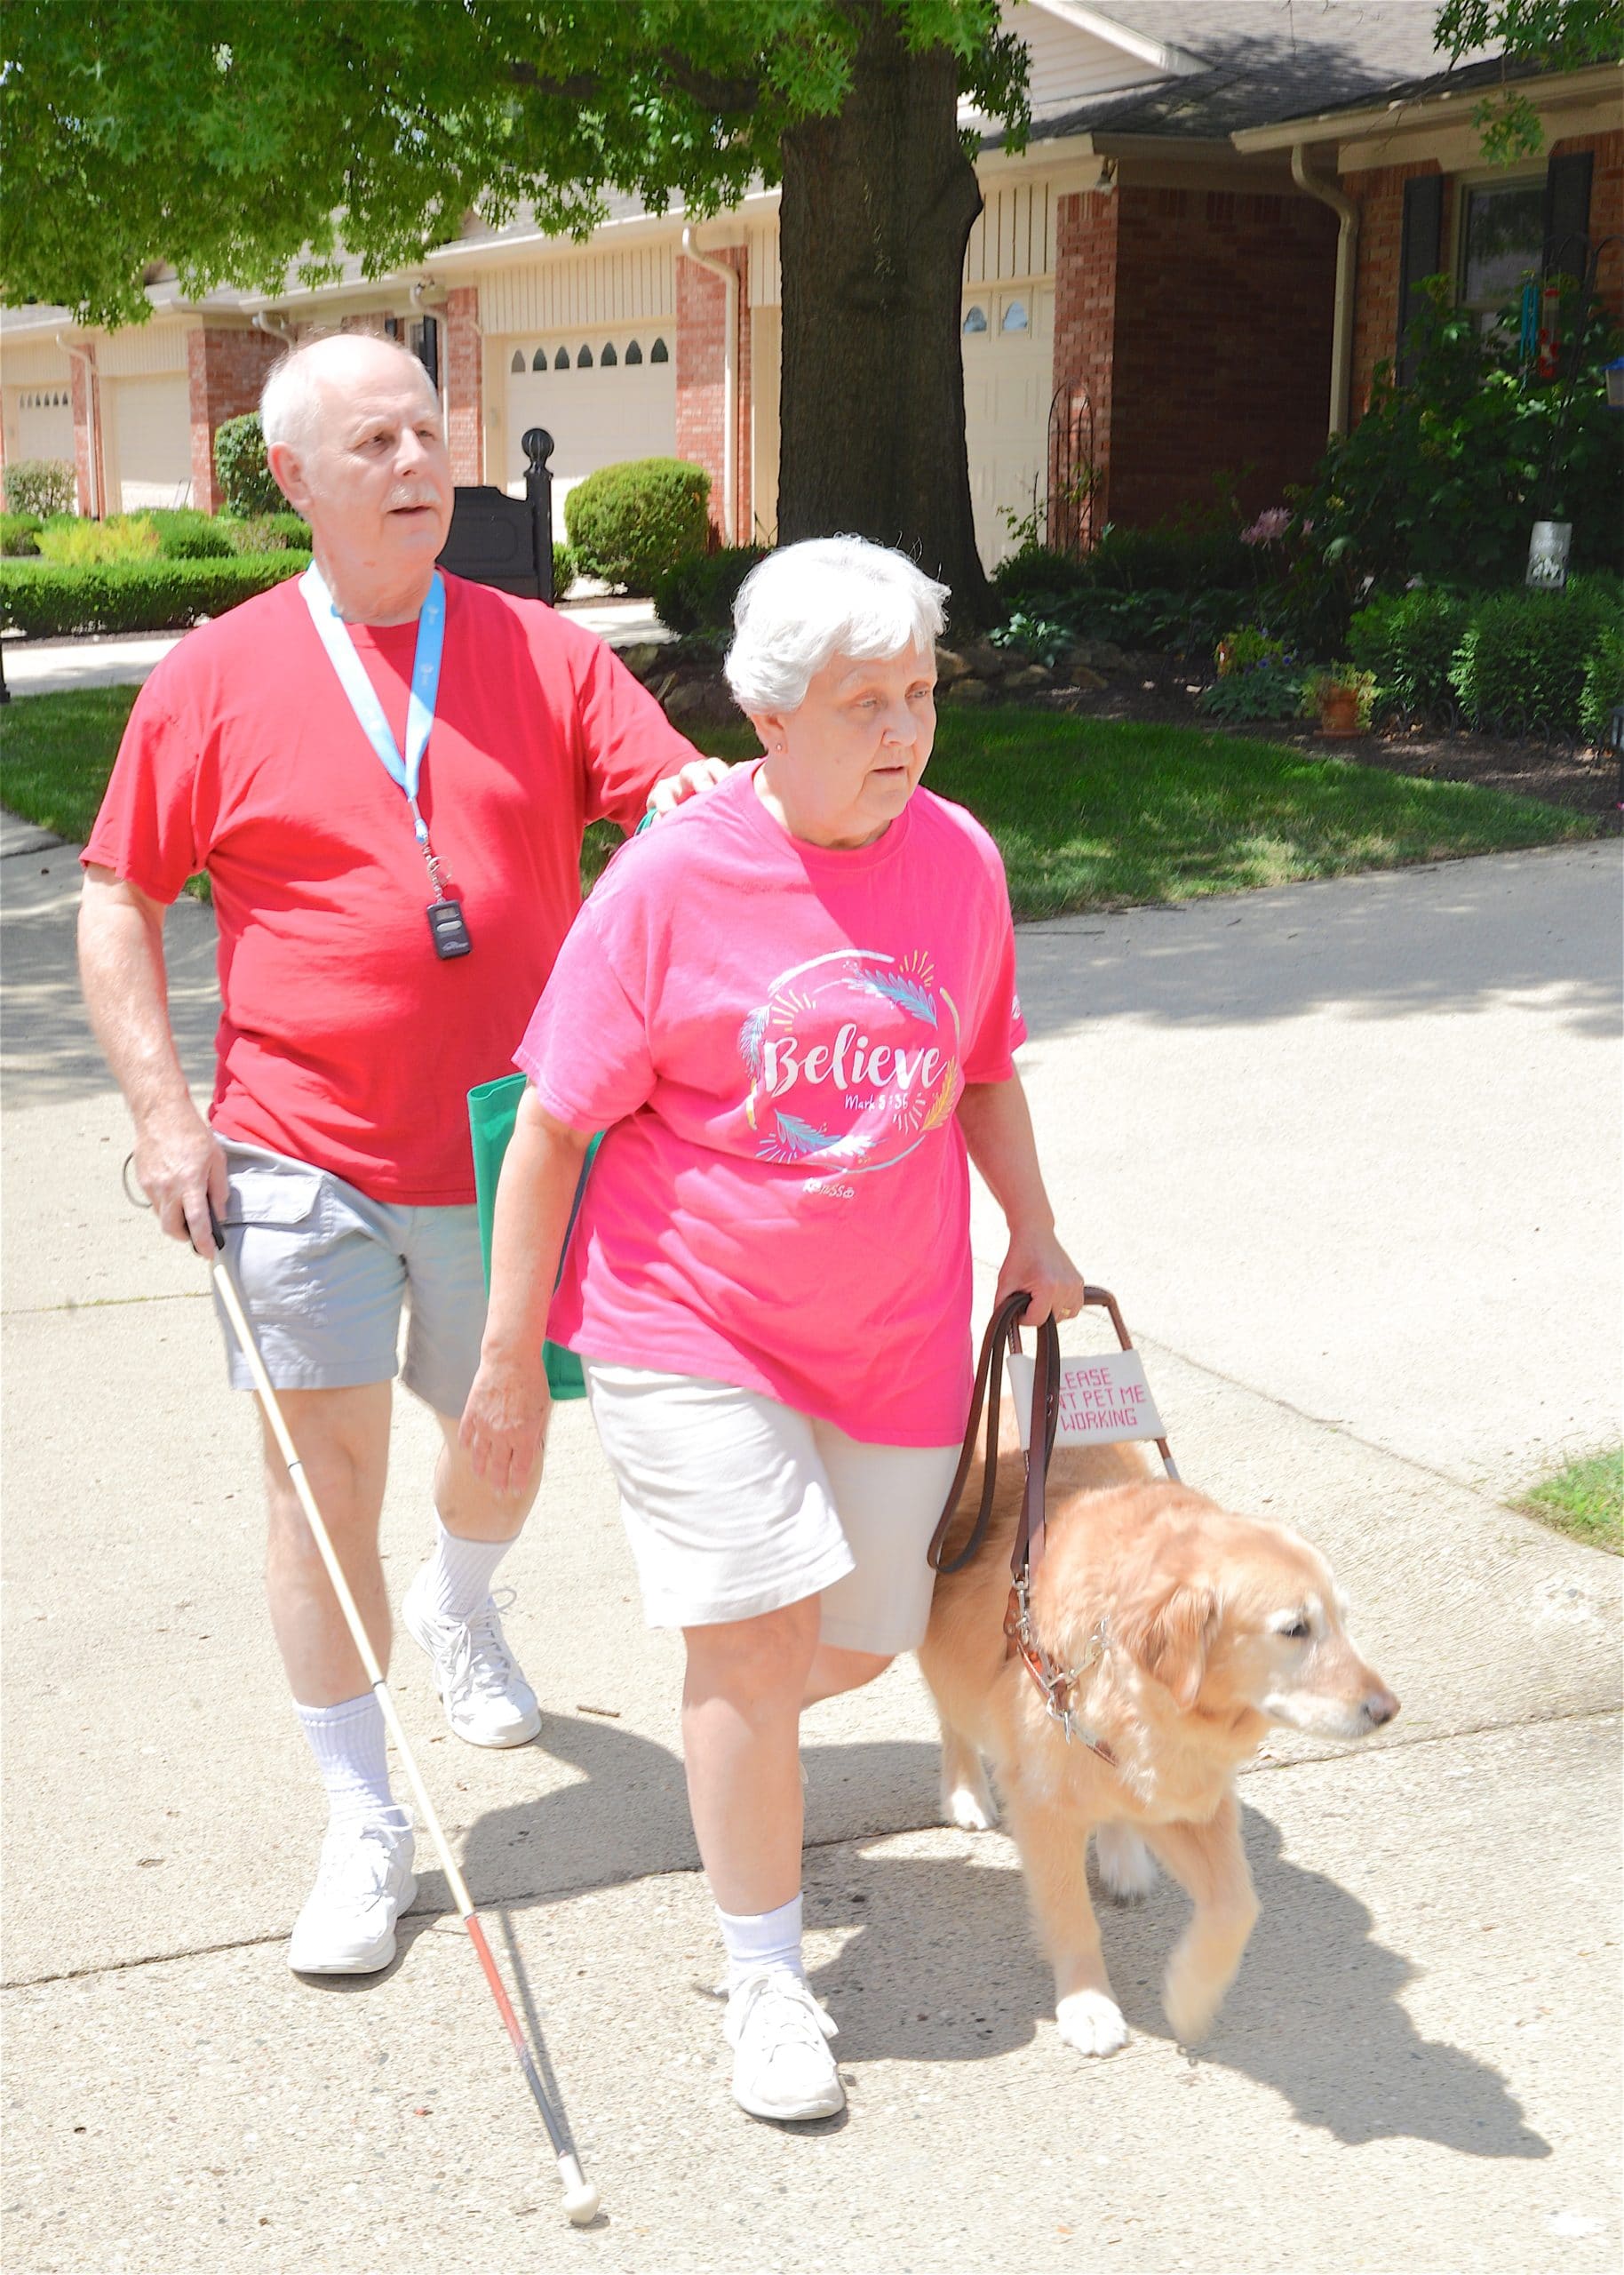 CICOA Transportation provides independence for Indianapolis adults with disabilities